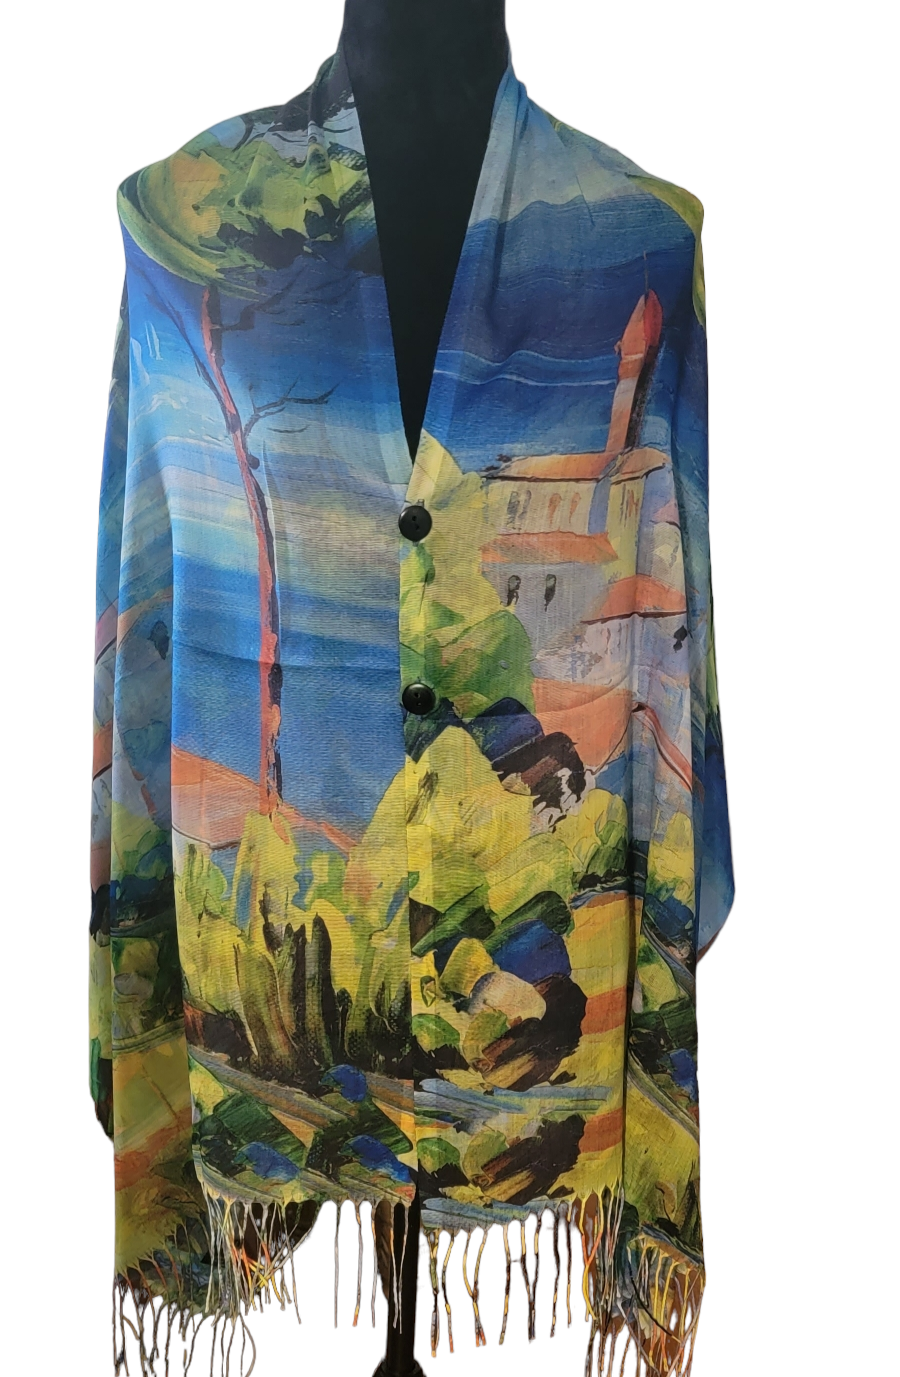 Wrap Yourself in Art: Vibrant Print Shawls Inspired by Fine Art - 04